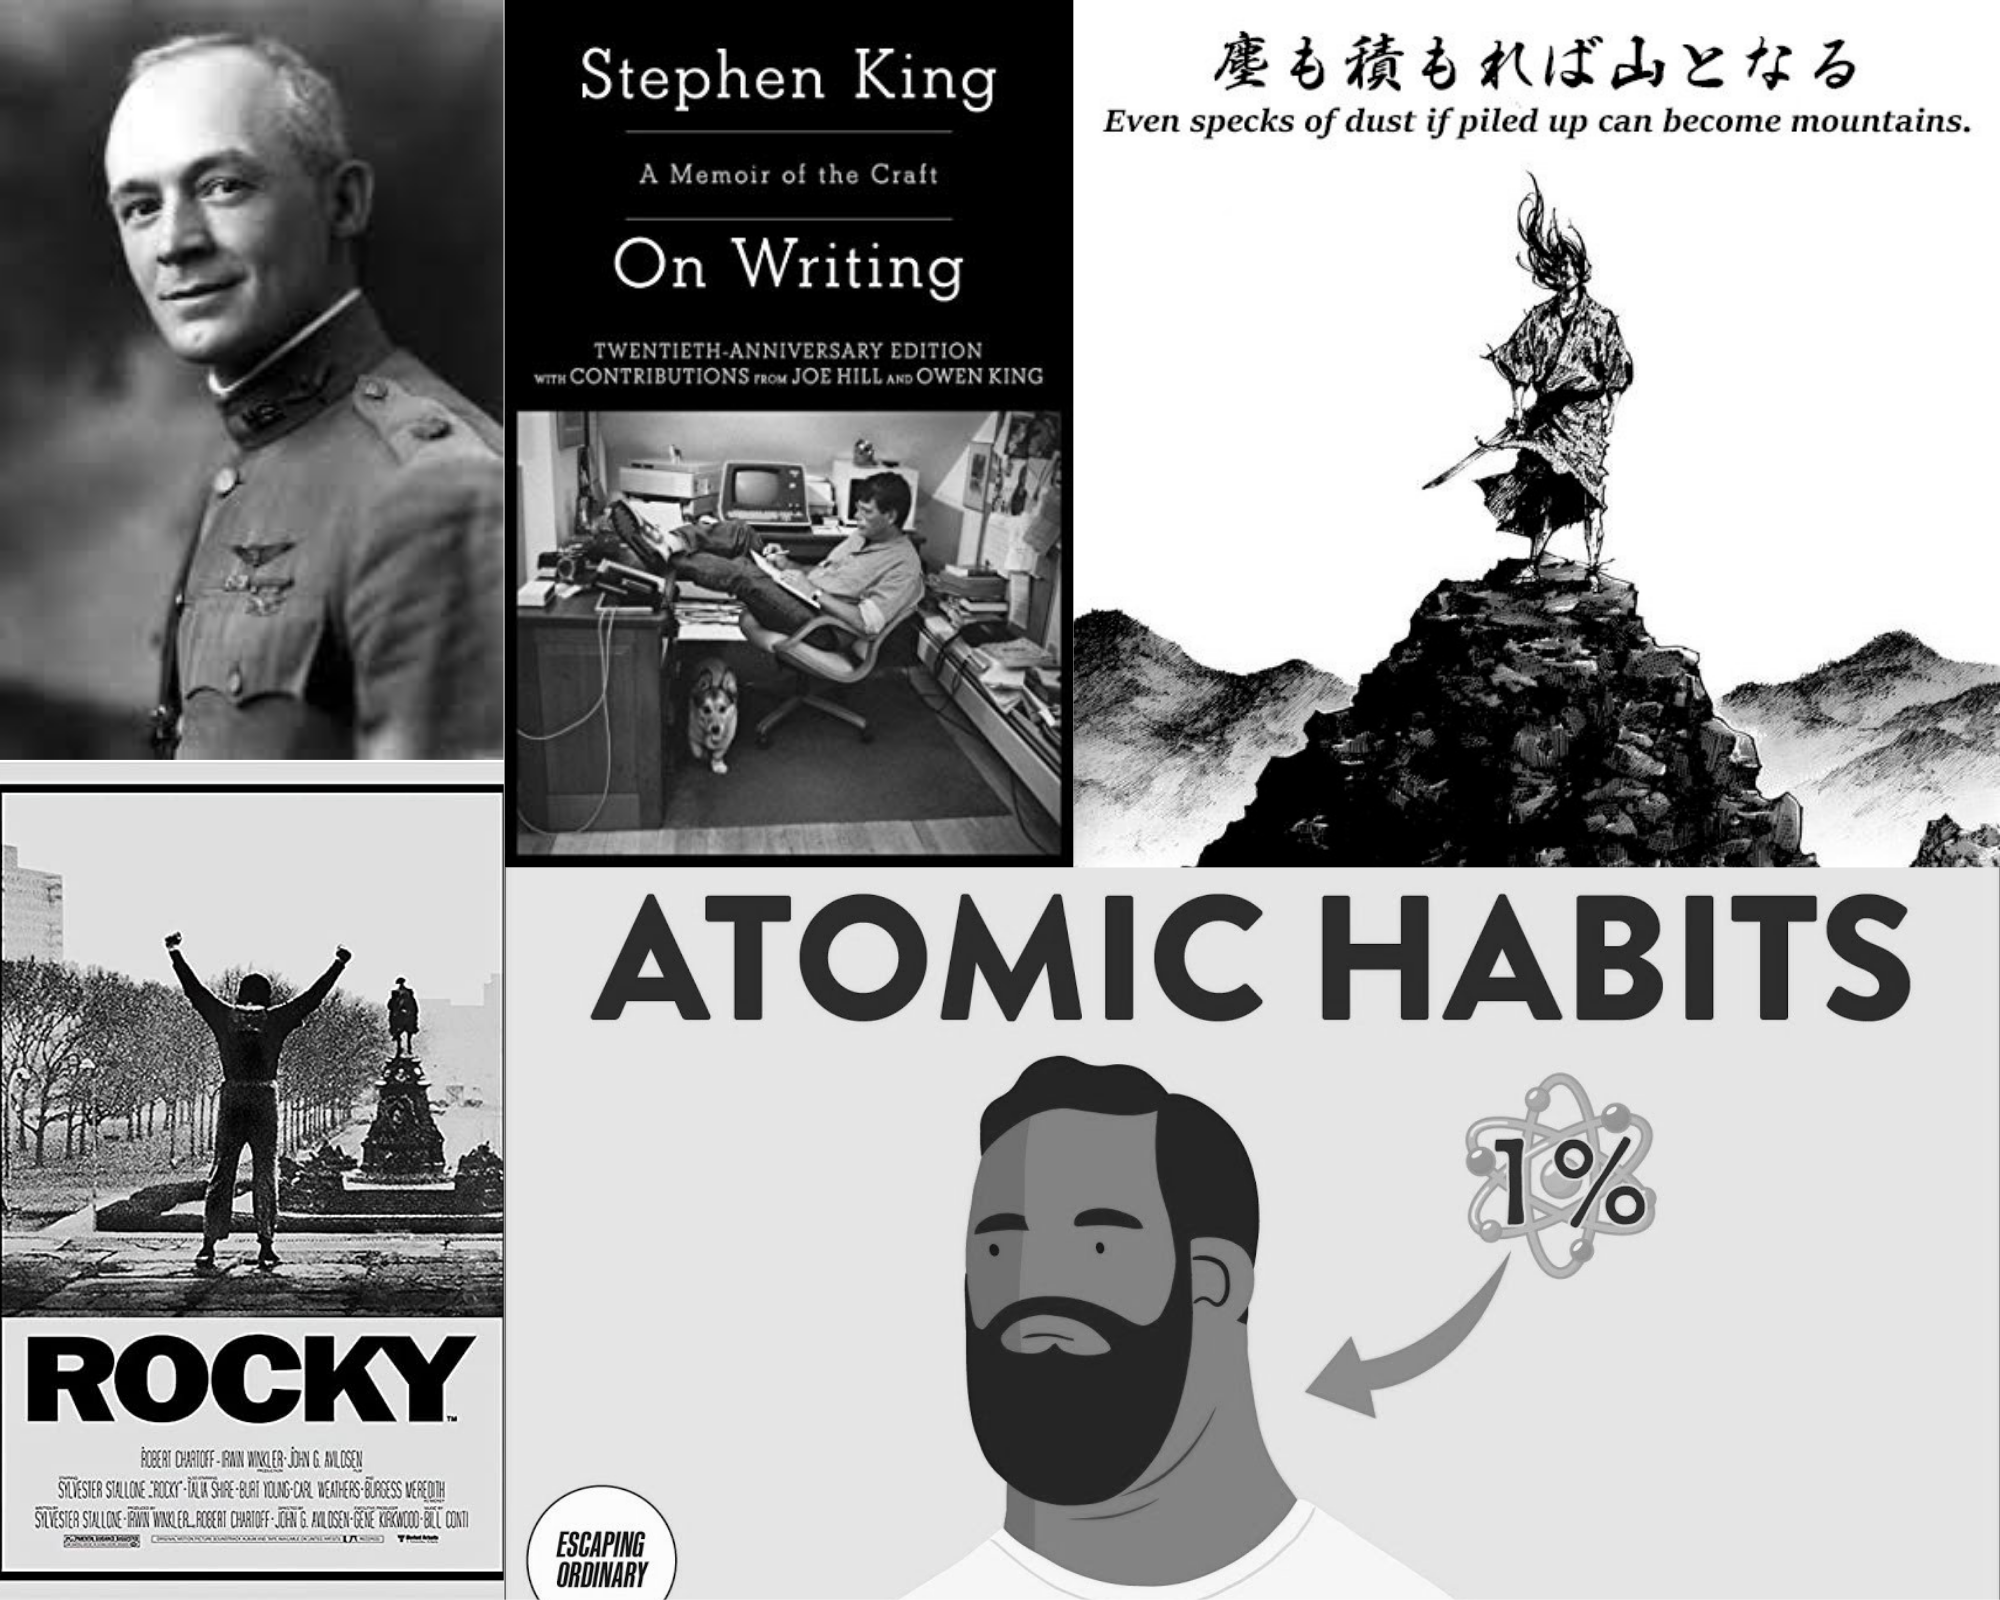 arnold-h-glasow-on-writing-rocky-escaping-ordinary-and-a-japanese